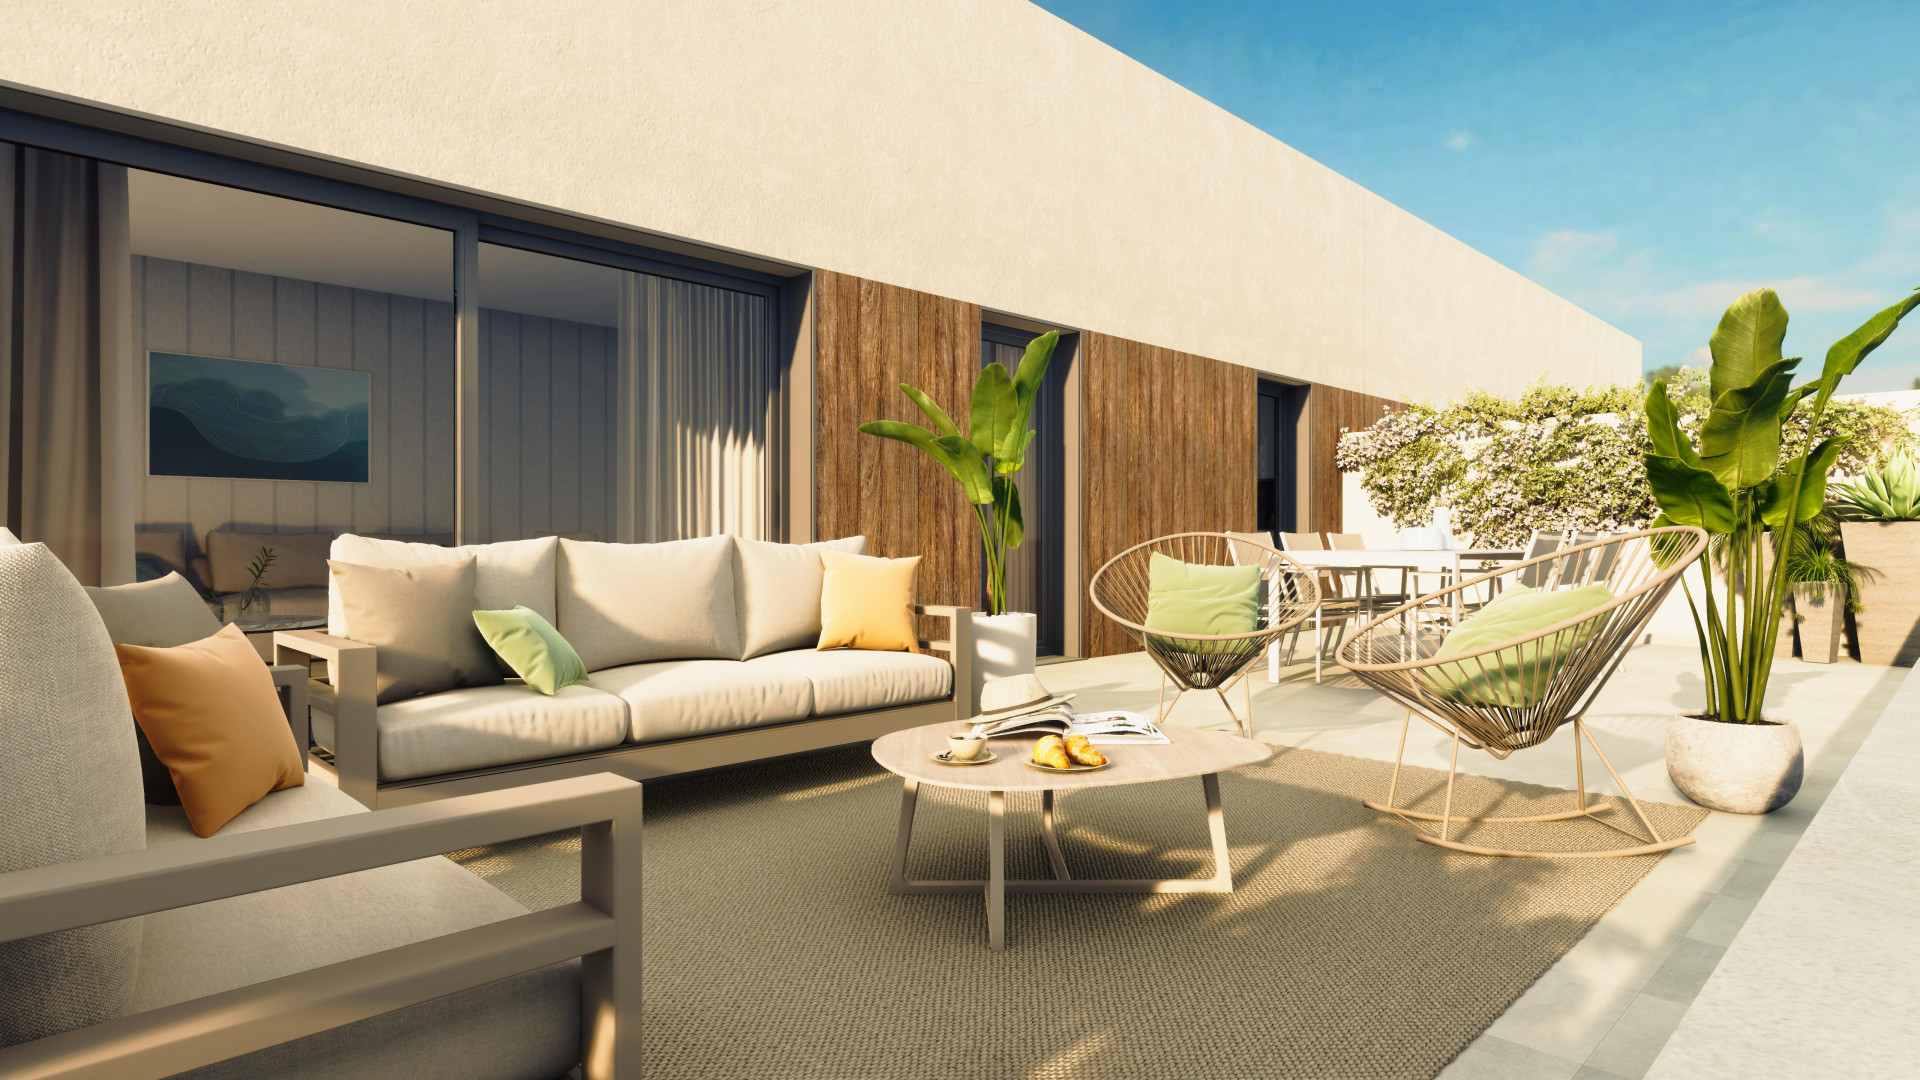 Sunset Bay Estepona: New project of 174 contemporary design homes in Estepona. | Image 6